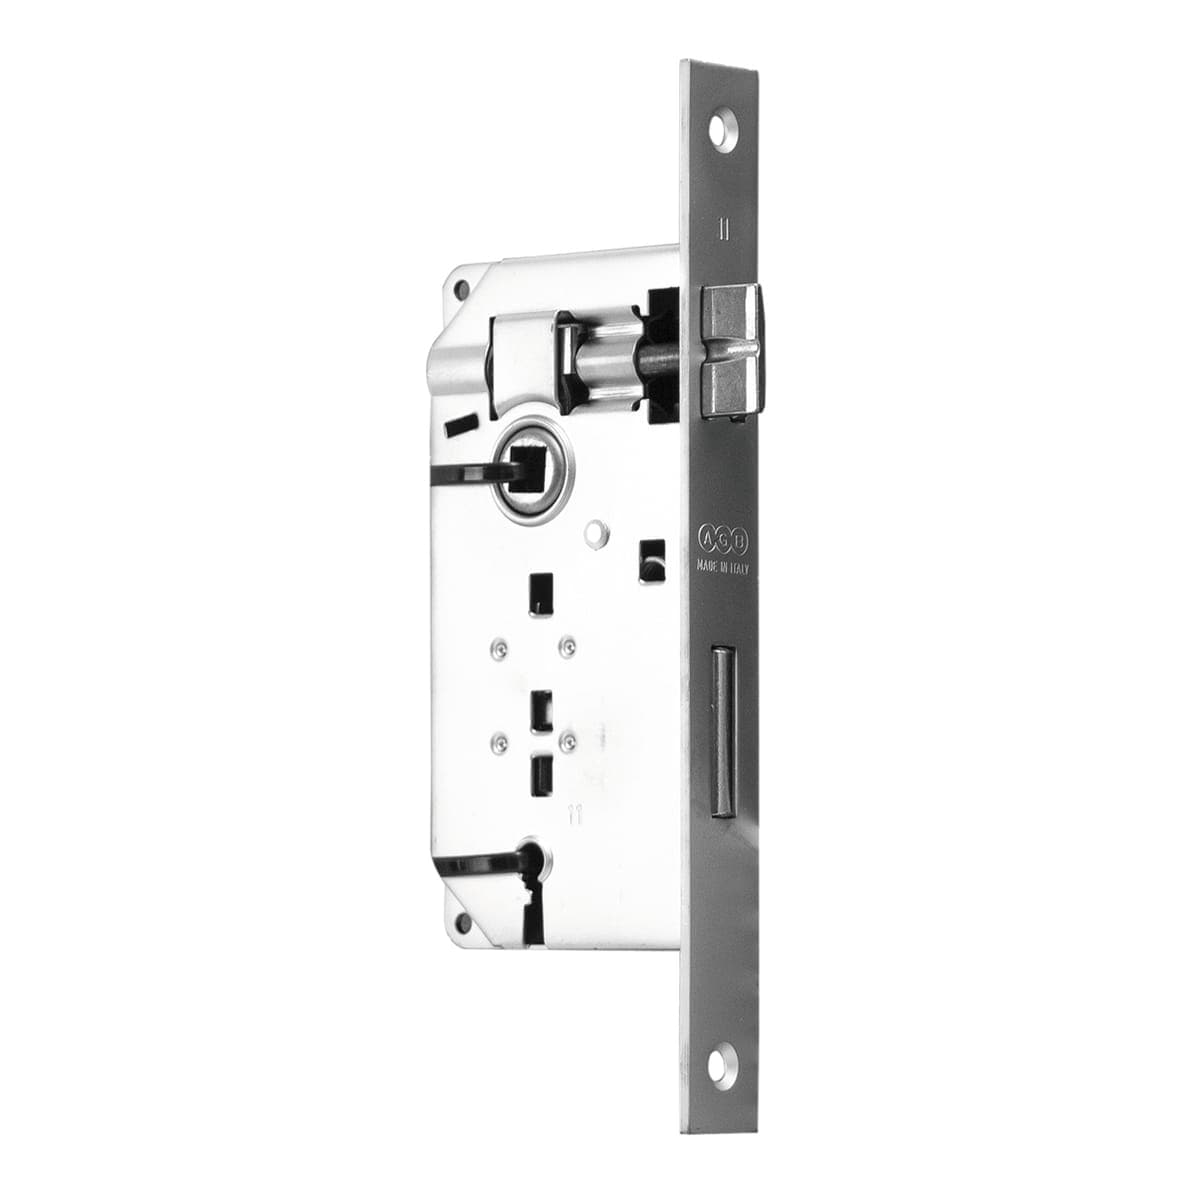 PATENT LOCK CENTRE DISTANCE 70MM ENTRY 40MM NICKEL-PLATED STEEL